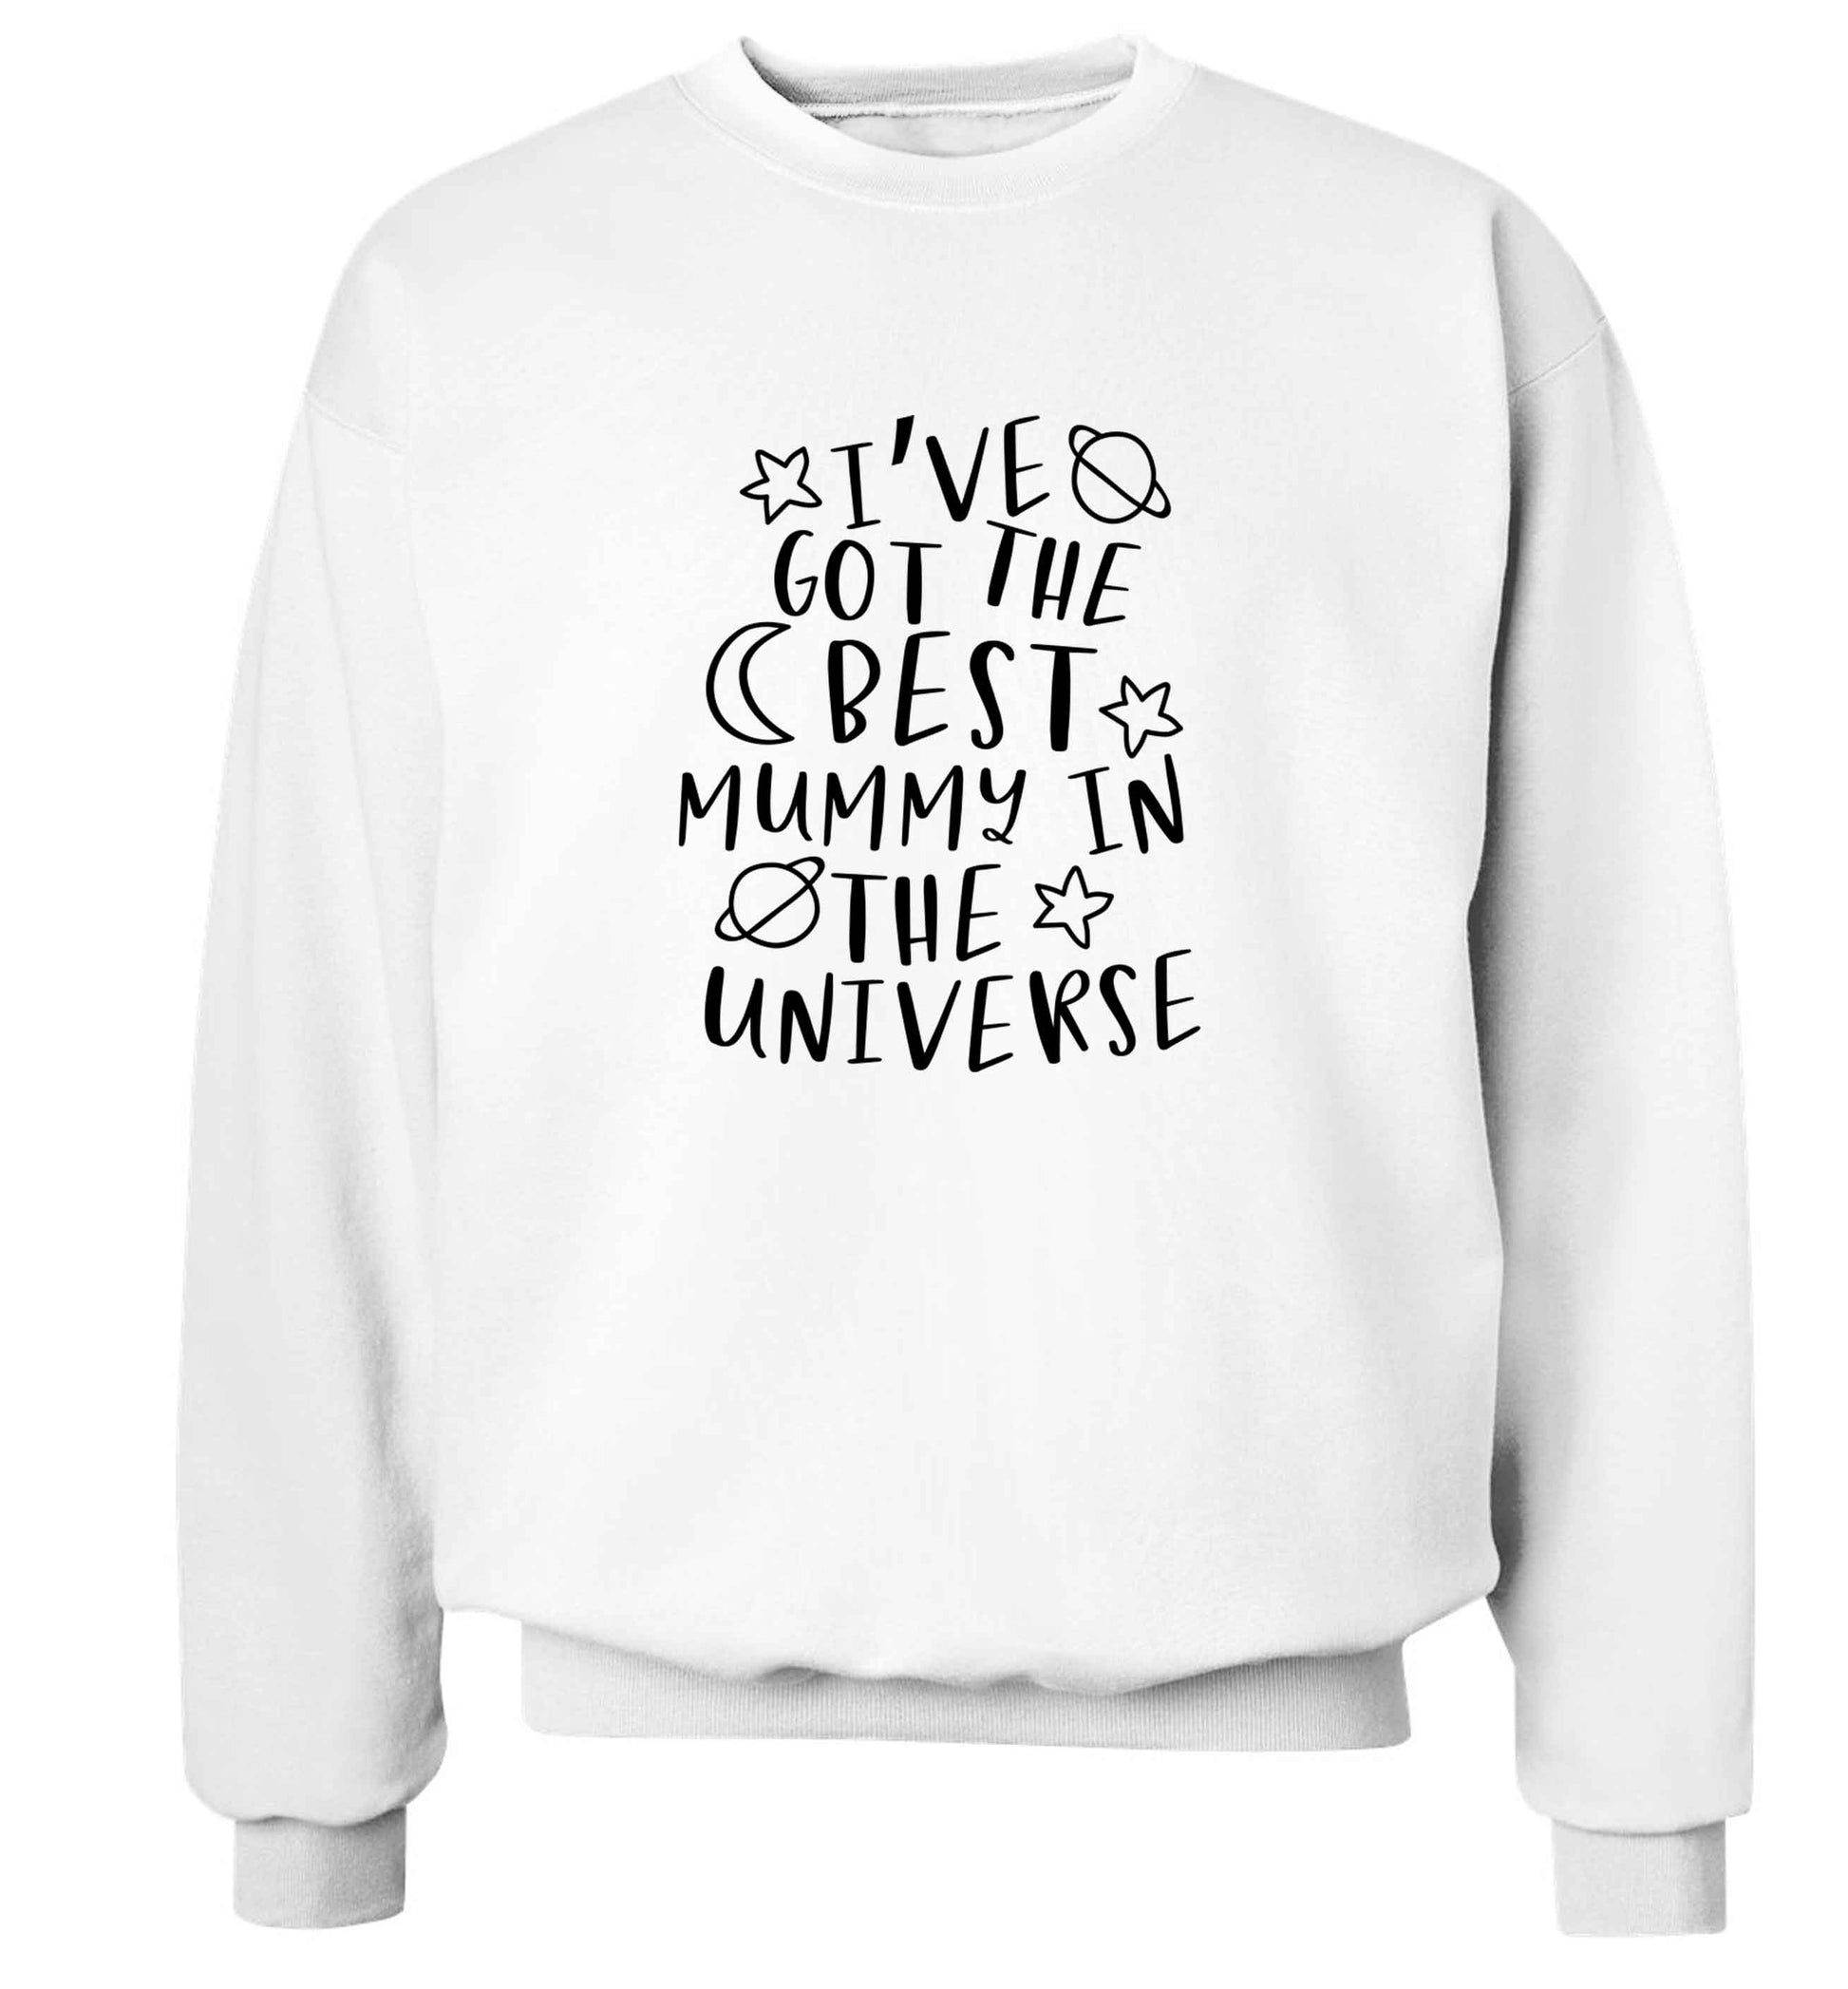 I've got the best mummy in the universe adult's unisex white sweater 2XL